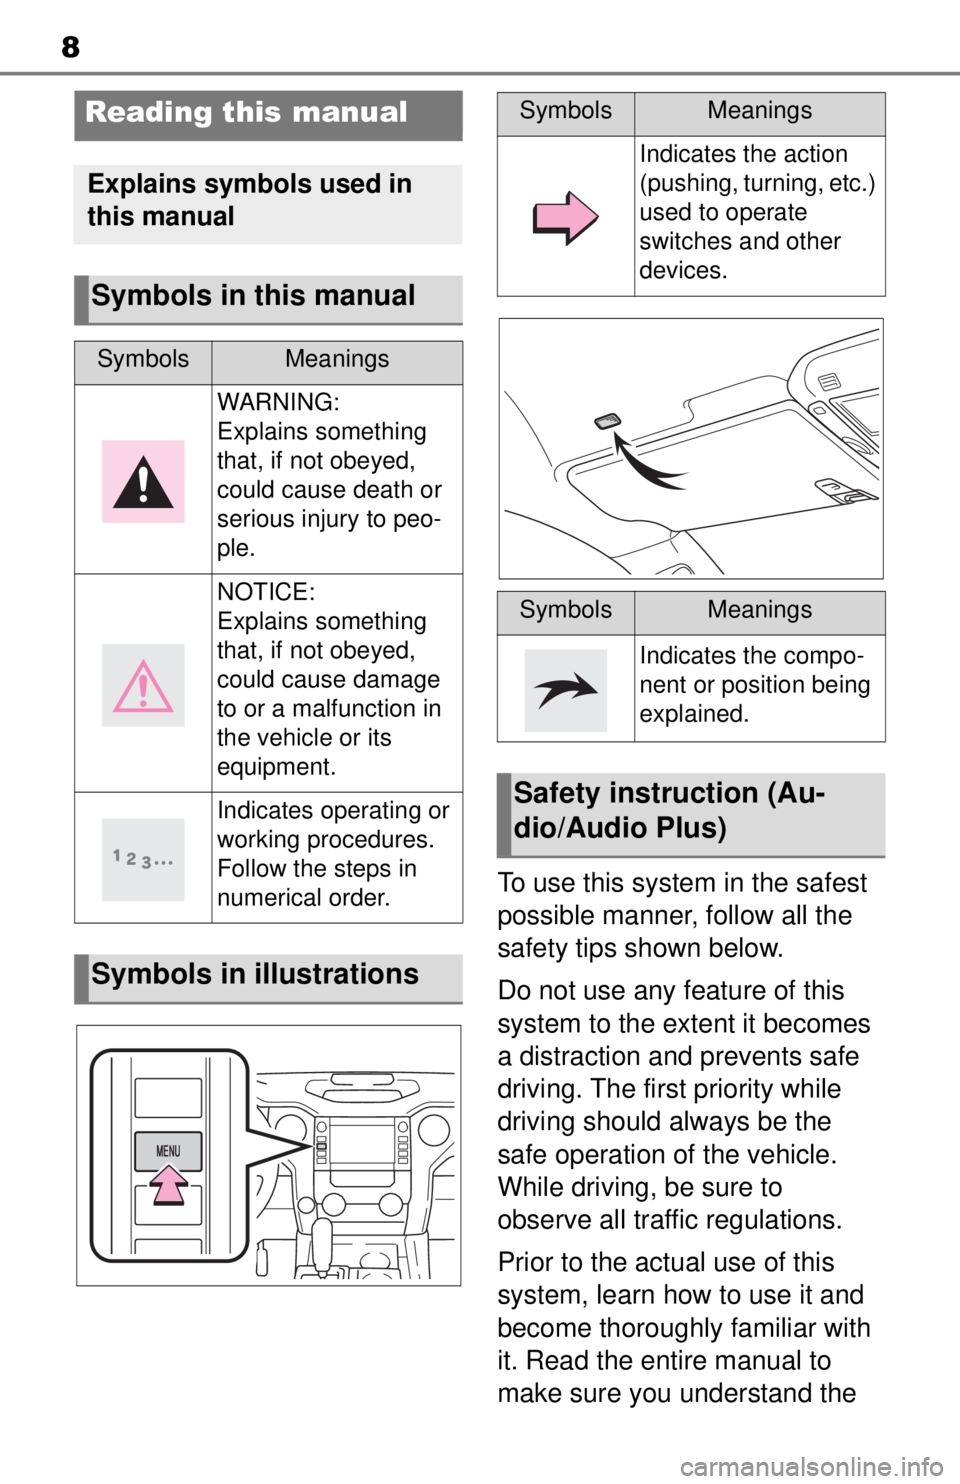 TOYOTA TUNDRA 2021  Accessories, Audio & Navigation (in English) 8
To use this system in the safest 
possible manner, follow all the 
safety tips shown below.
Do not use any feature of this 
system to the extent it becomes 
a distraction and prevents safe 
driving.